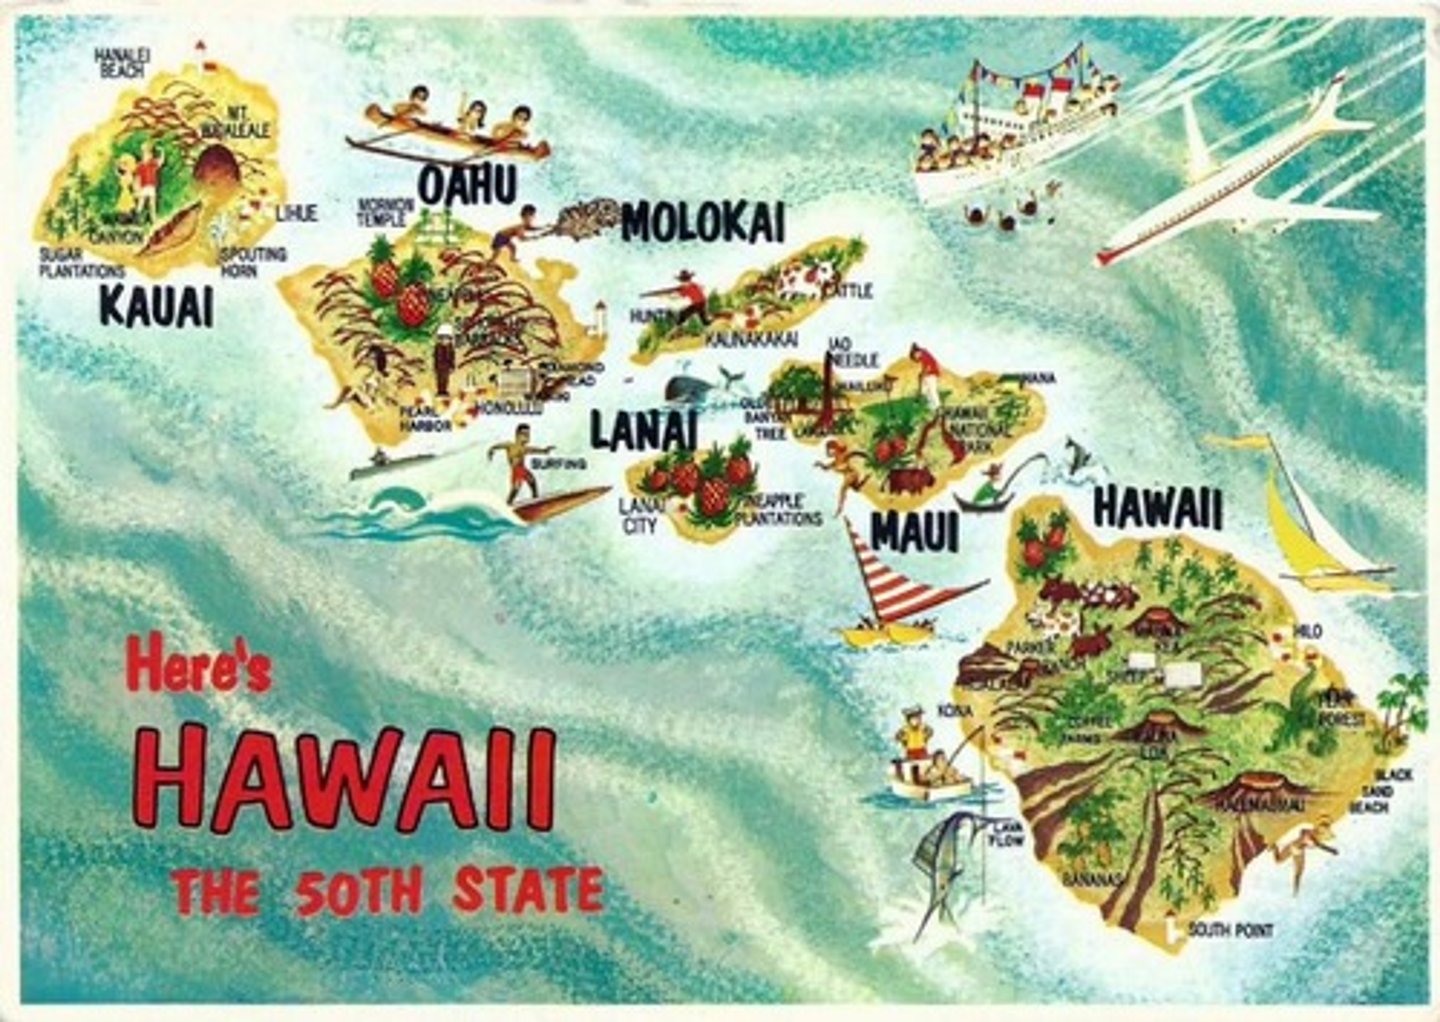 <p>U.S. wanted Hawaii for business and so Hawaiian sugar could be sold in the U.S. duty free, Queen Liliuokalani opposed so Sanford B. Dole overthrew her in 1893, William McKinley convinced Congress to annex Hawaii in 1898</p>